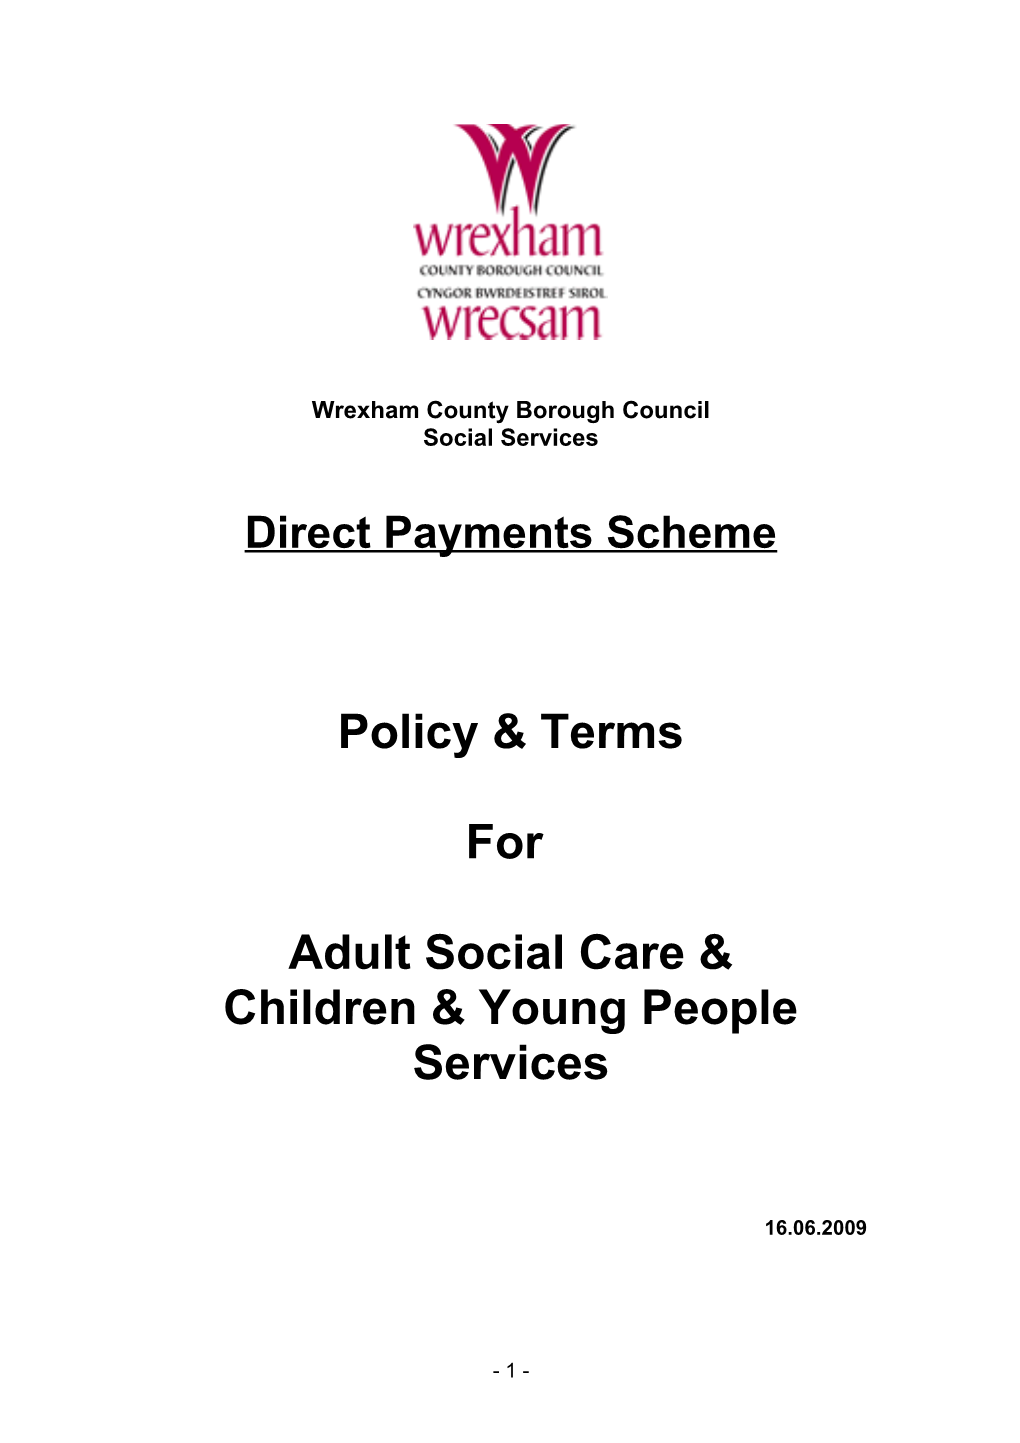 Direct Payments Scheme - Policy & Terms for Adult Social Care & Children & Young People Services